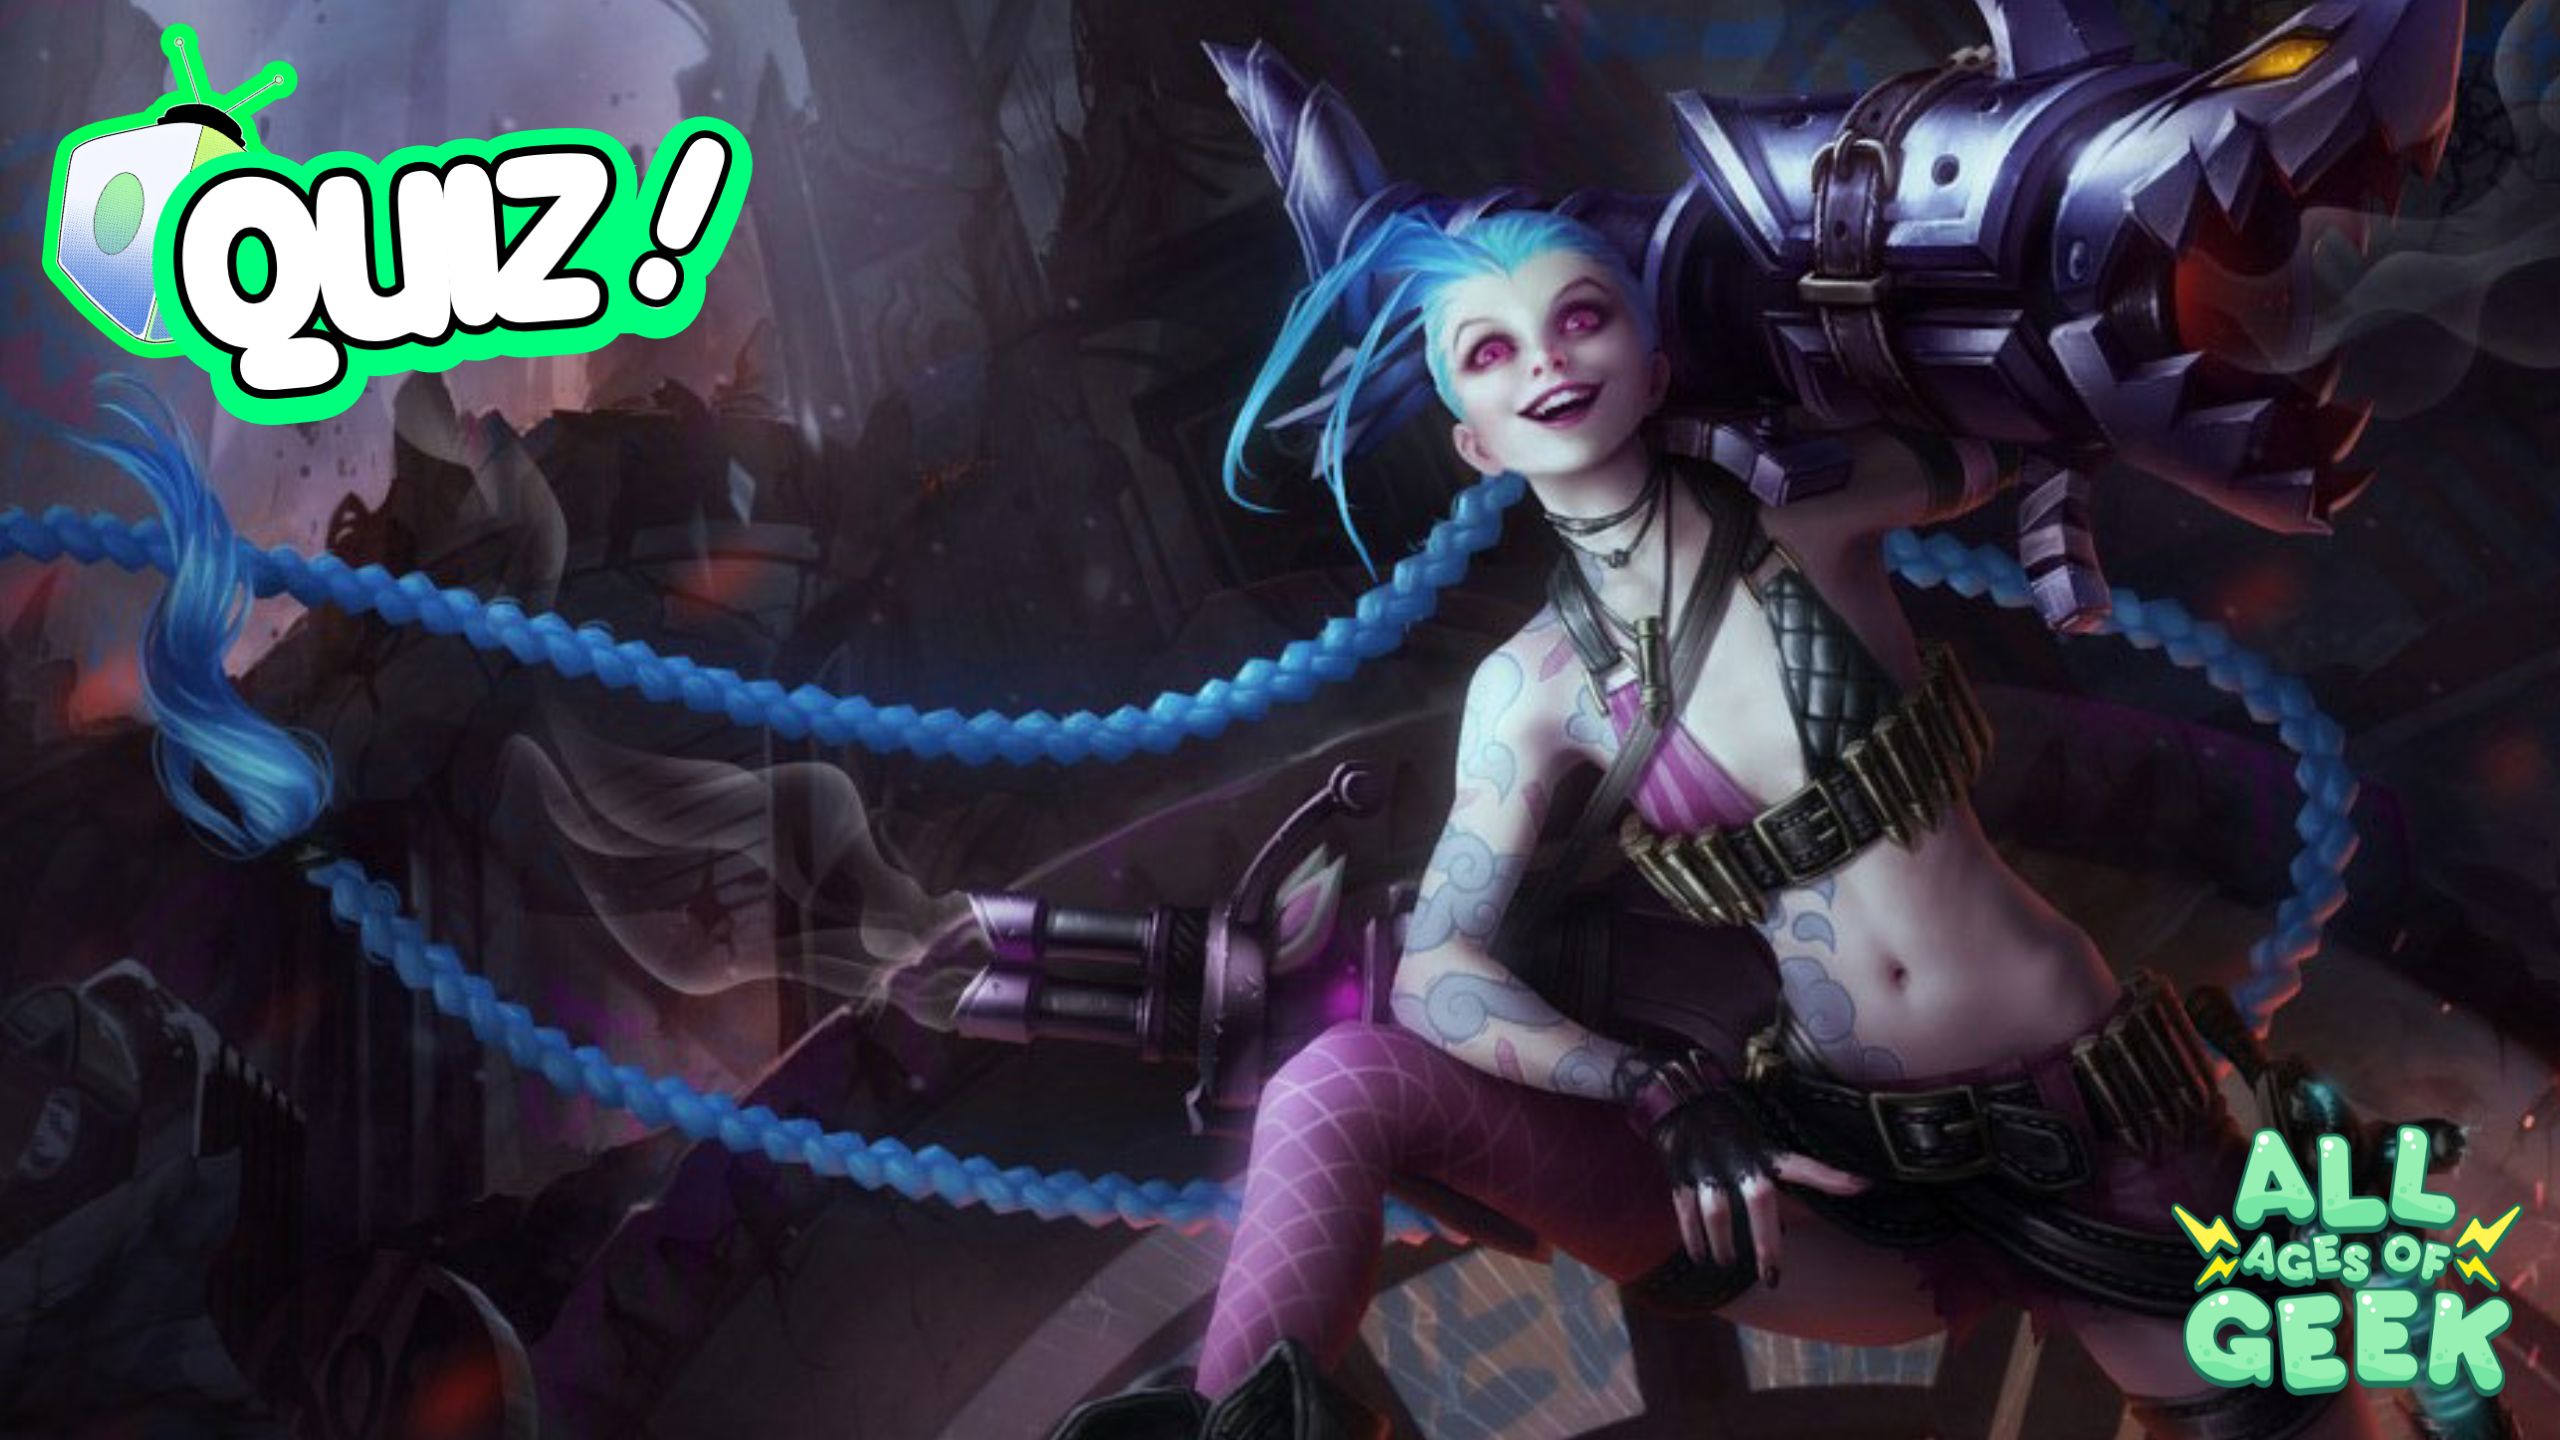 Which “League of Legends” Champion Are You? Take the Quiz to Find Out!